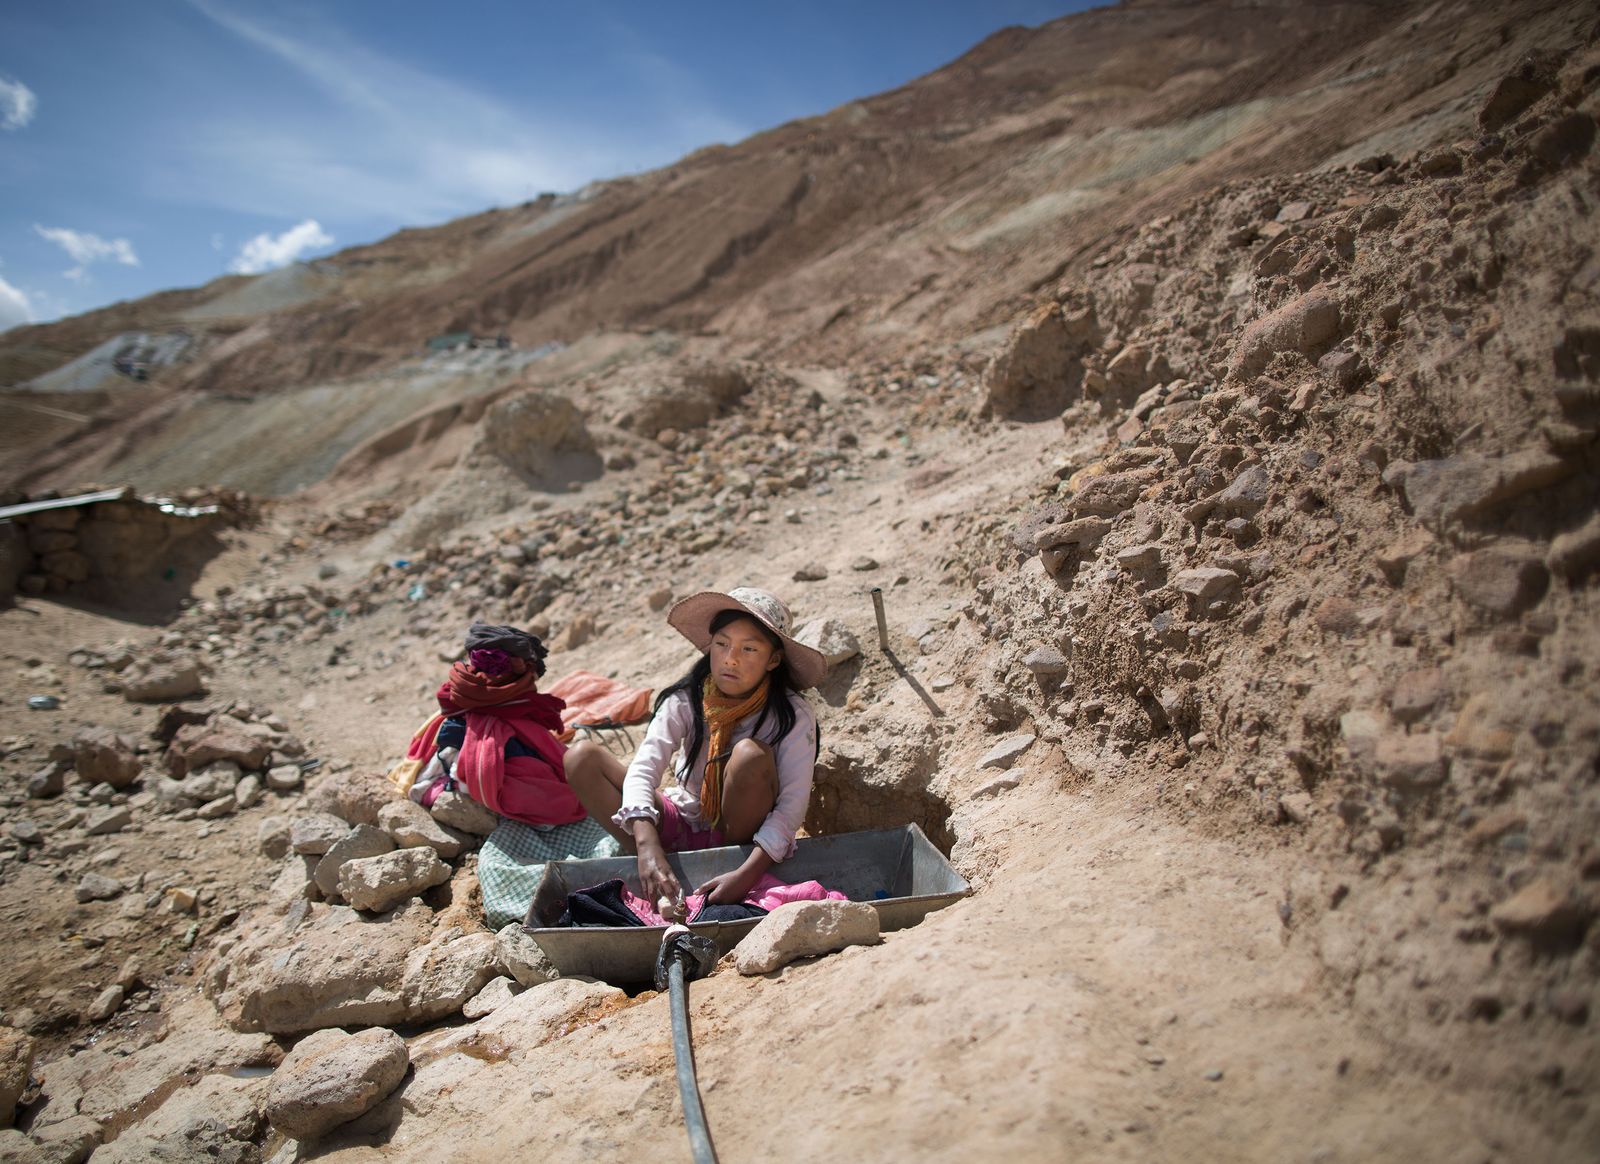 © Toby Binder - Image from the Child labour in Bolivia photography project